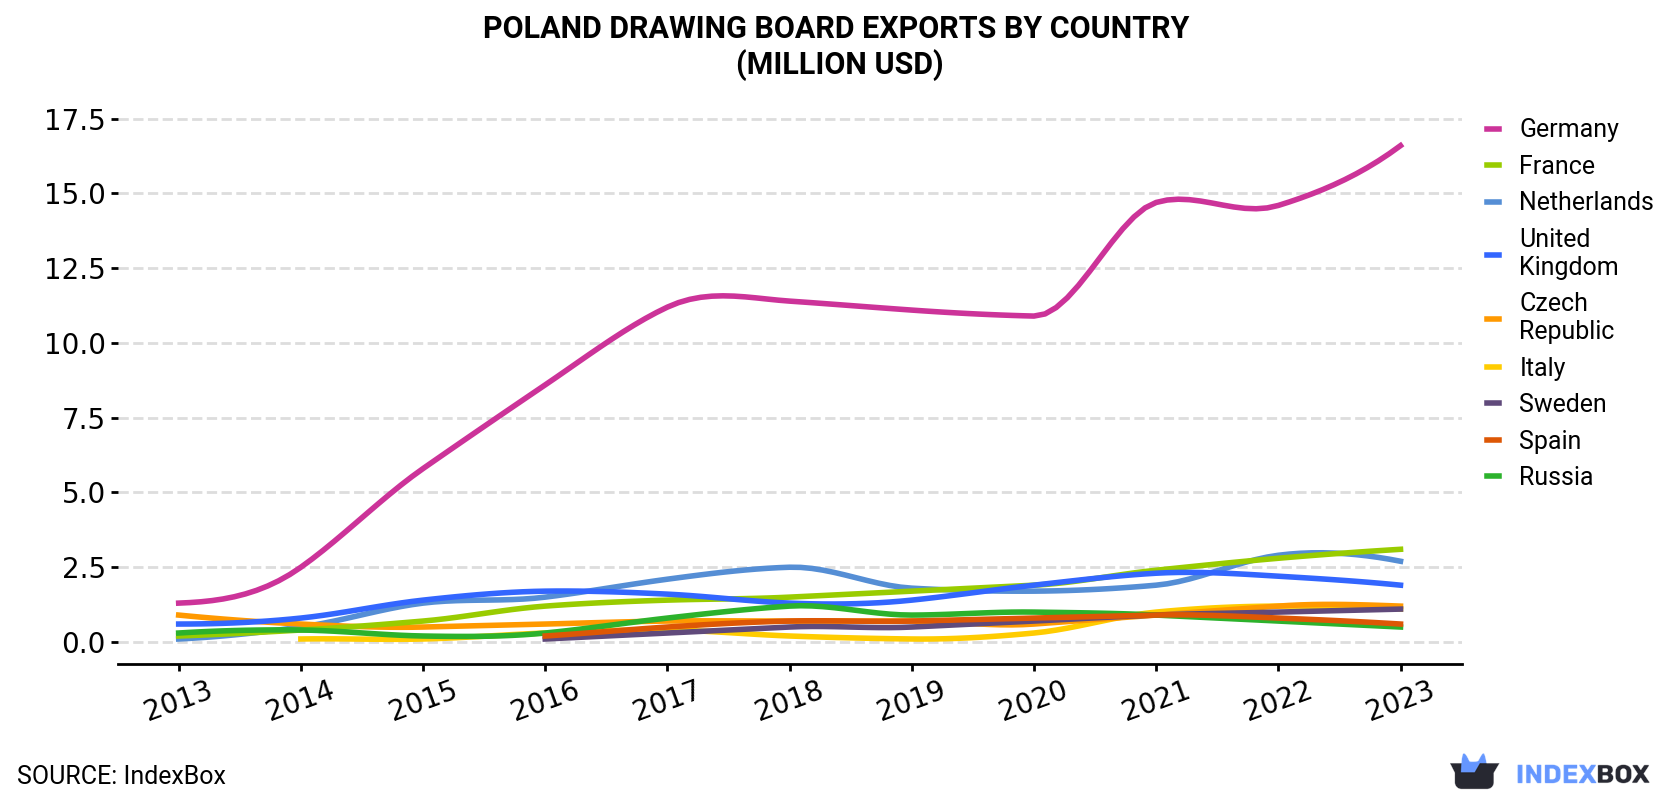 Poland Drawing Board Exports By Country (Million USD)